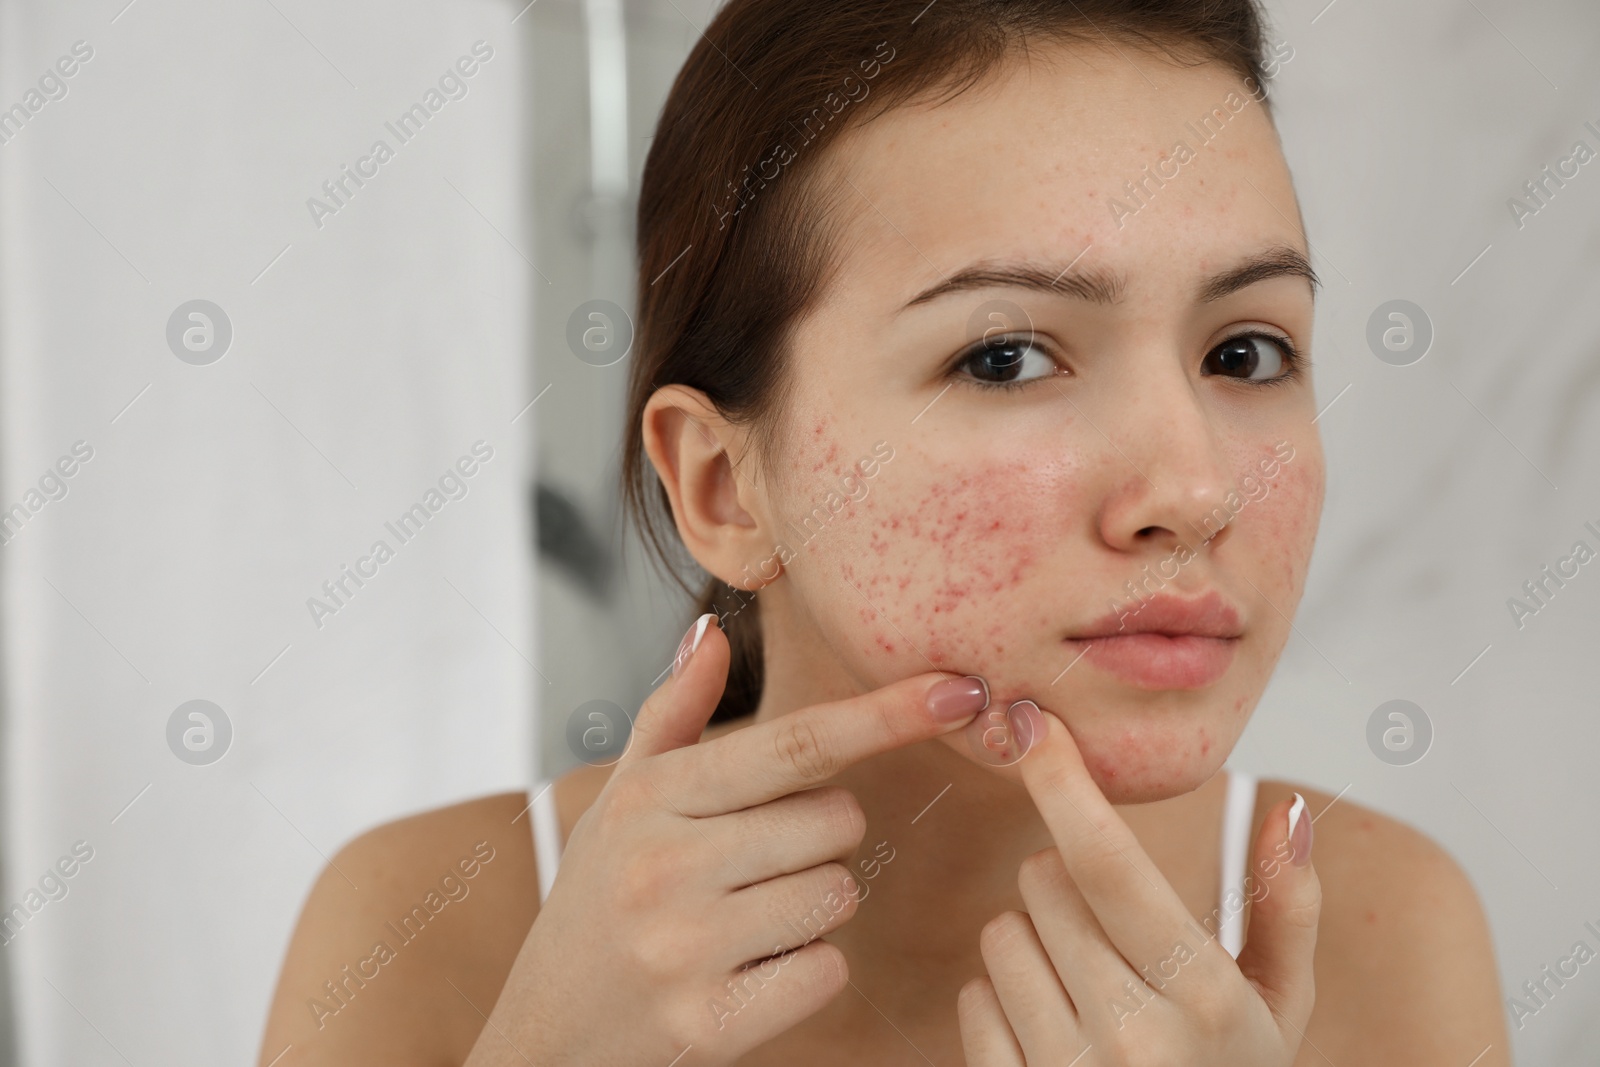 Photo of Teen girl with acne problem squeezing pimple indoors